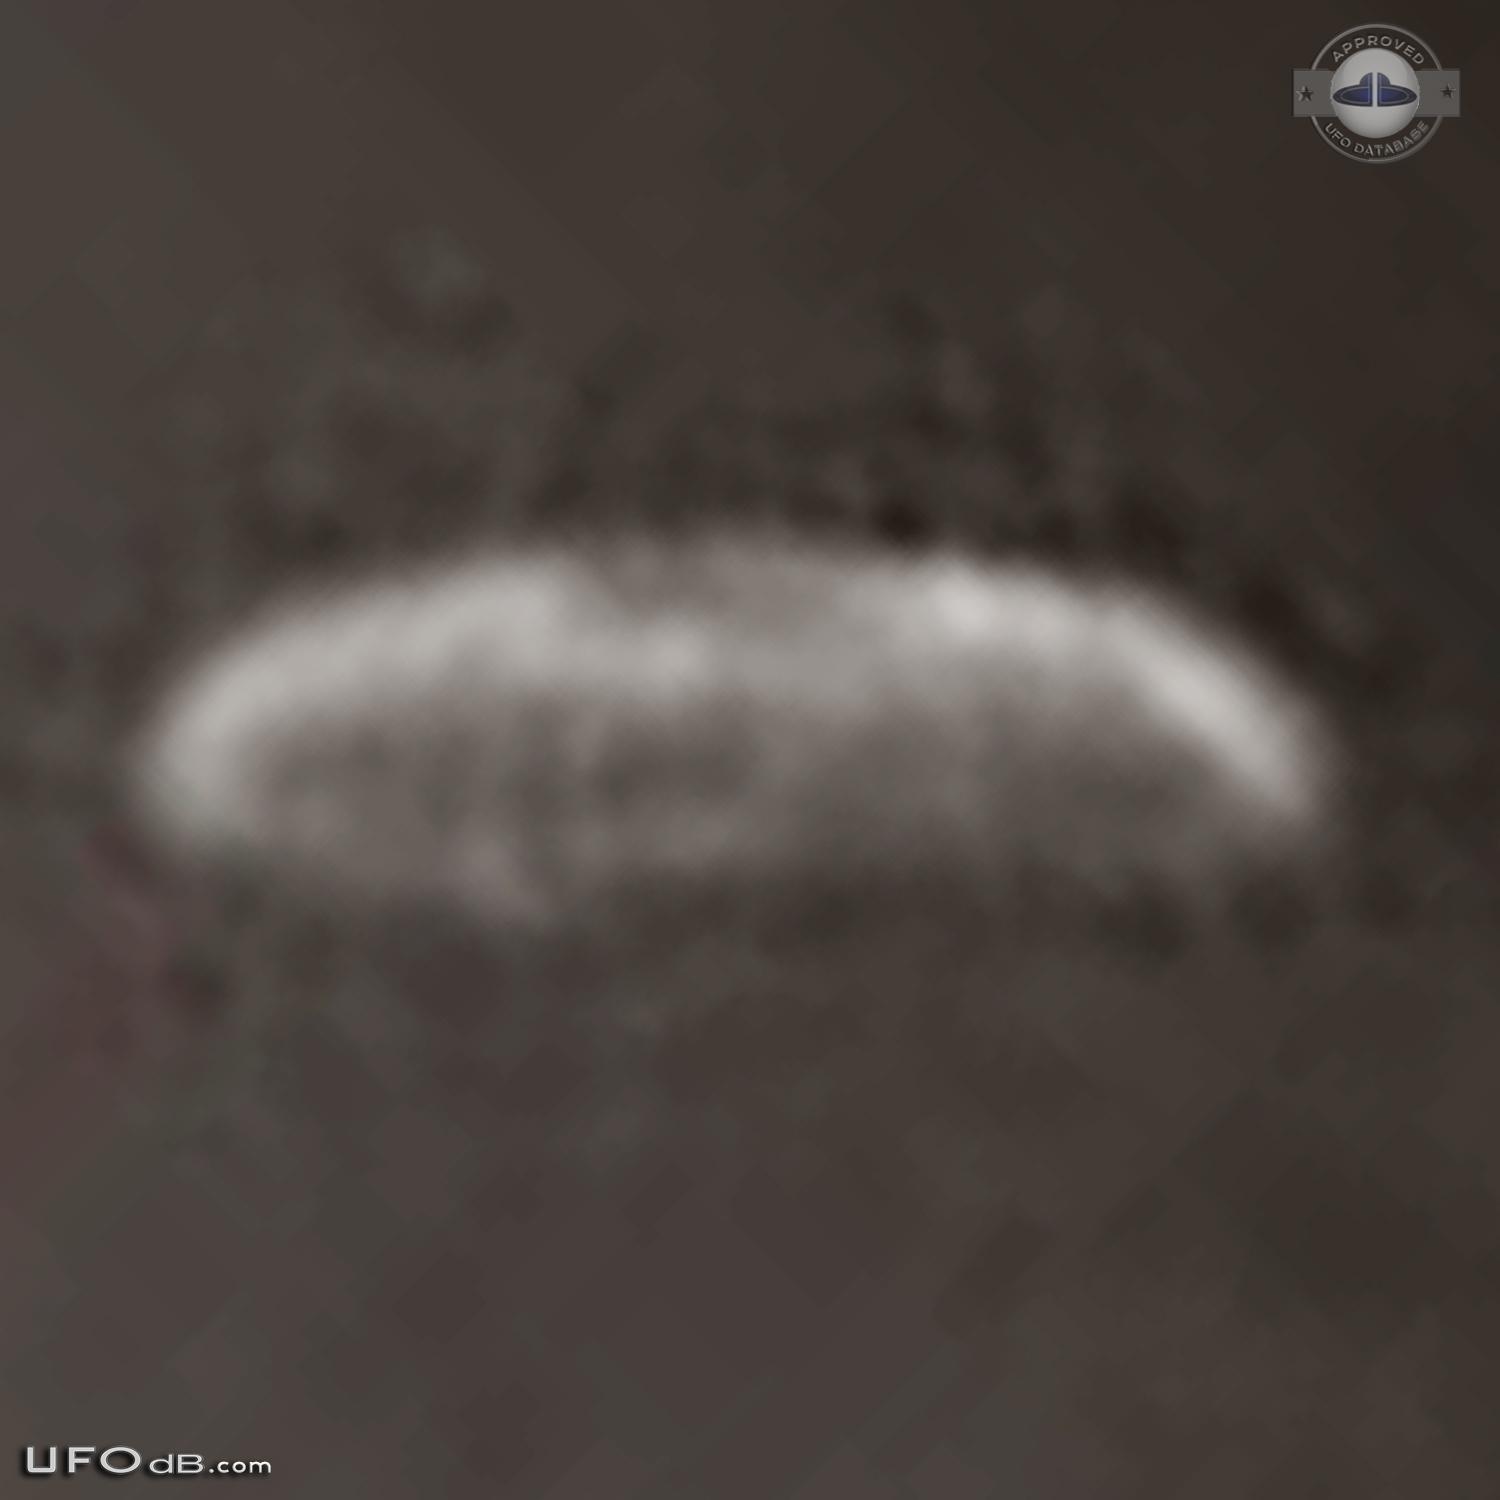 Parachute shaped UFO seen over Claromeco, Tres Arroyos Argentina UFO Picture #620-7